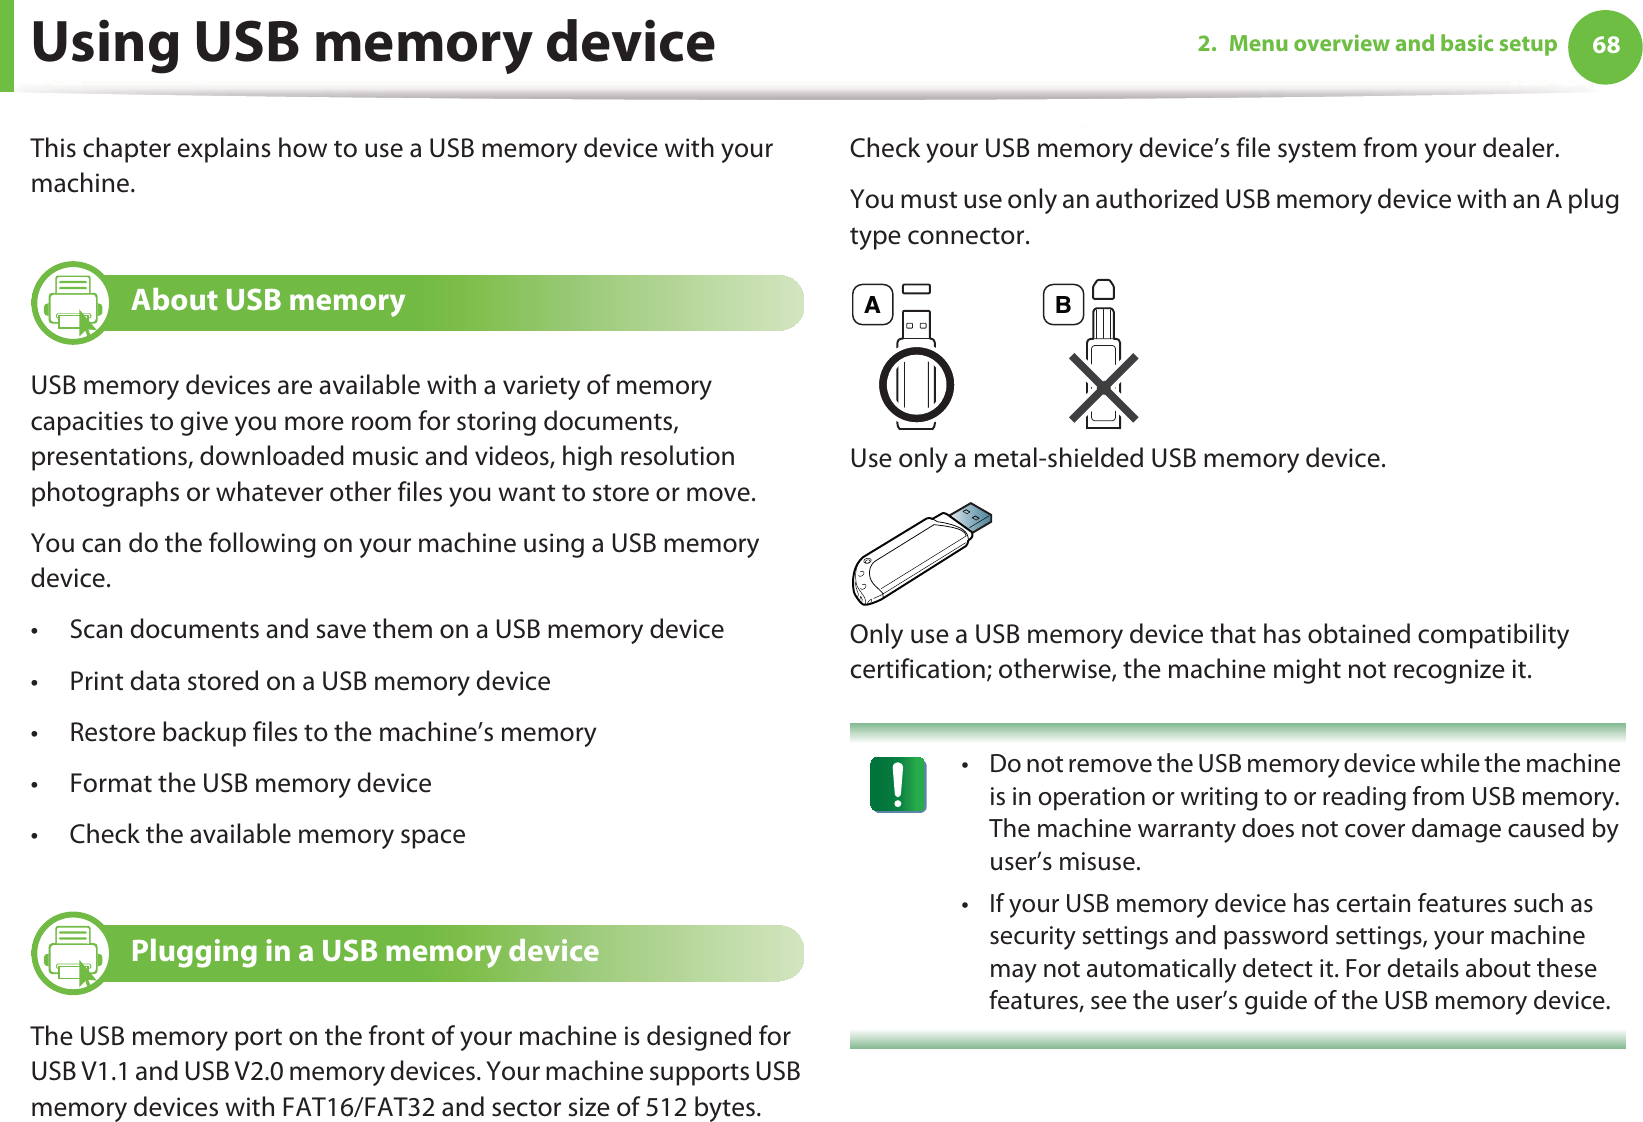 682. Menu overview and basic setupUsing USB memory deviceThis chapter explains how to use a USB memory device with your machine.22 About USB memoryUSB memory devices are available with a variety of memory capacities to give you more room for storing documents, presentations, downloaded music and videos, high resolution photographs or whatever other files you want to store or move.You can do the following on your machine using a USB memory device.• Scan documents and save them on a USB memory device• Print data stored on a USB memory device• Restore backup files to the machine’s memory• Format the USB memory device• Check the available memory space23 Plugging in a USB memory deviceThe USB memory port on the front of your machine is designed for USB V1.1 and USB V2.0 memory devices. Your machine supports USB memory devices with FAT16/FAT32 and sector size of 512 bytes.Check your USB memory device’s file system from your dealer.You must use only an authorized USB memory device with an A plug type connector.Use only a metal-shielded USB memory device.Only use a USB memory device that has obtained compatibility certification; otherwise, the machine might not recognize it. • Do not remove the USB memory device while the machine is in operation or writing to or reading from USB memory. The machine warranty does not cover damage caused by user’s misuse. • If your USB memory device has certain features such as security settings and password settings, your machine may not automatically detect it. For details about these features, see the user’s guide of the USB memory device. A B